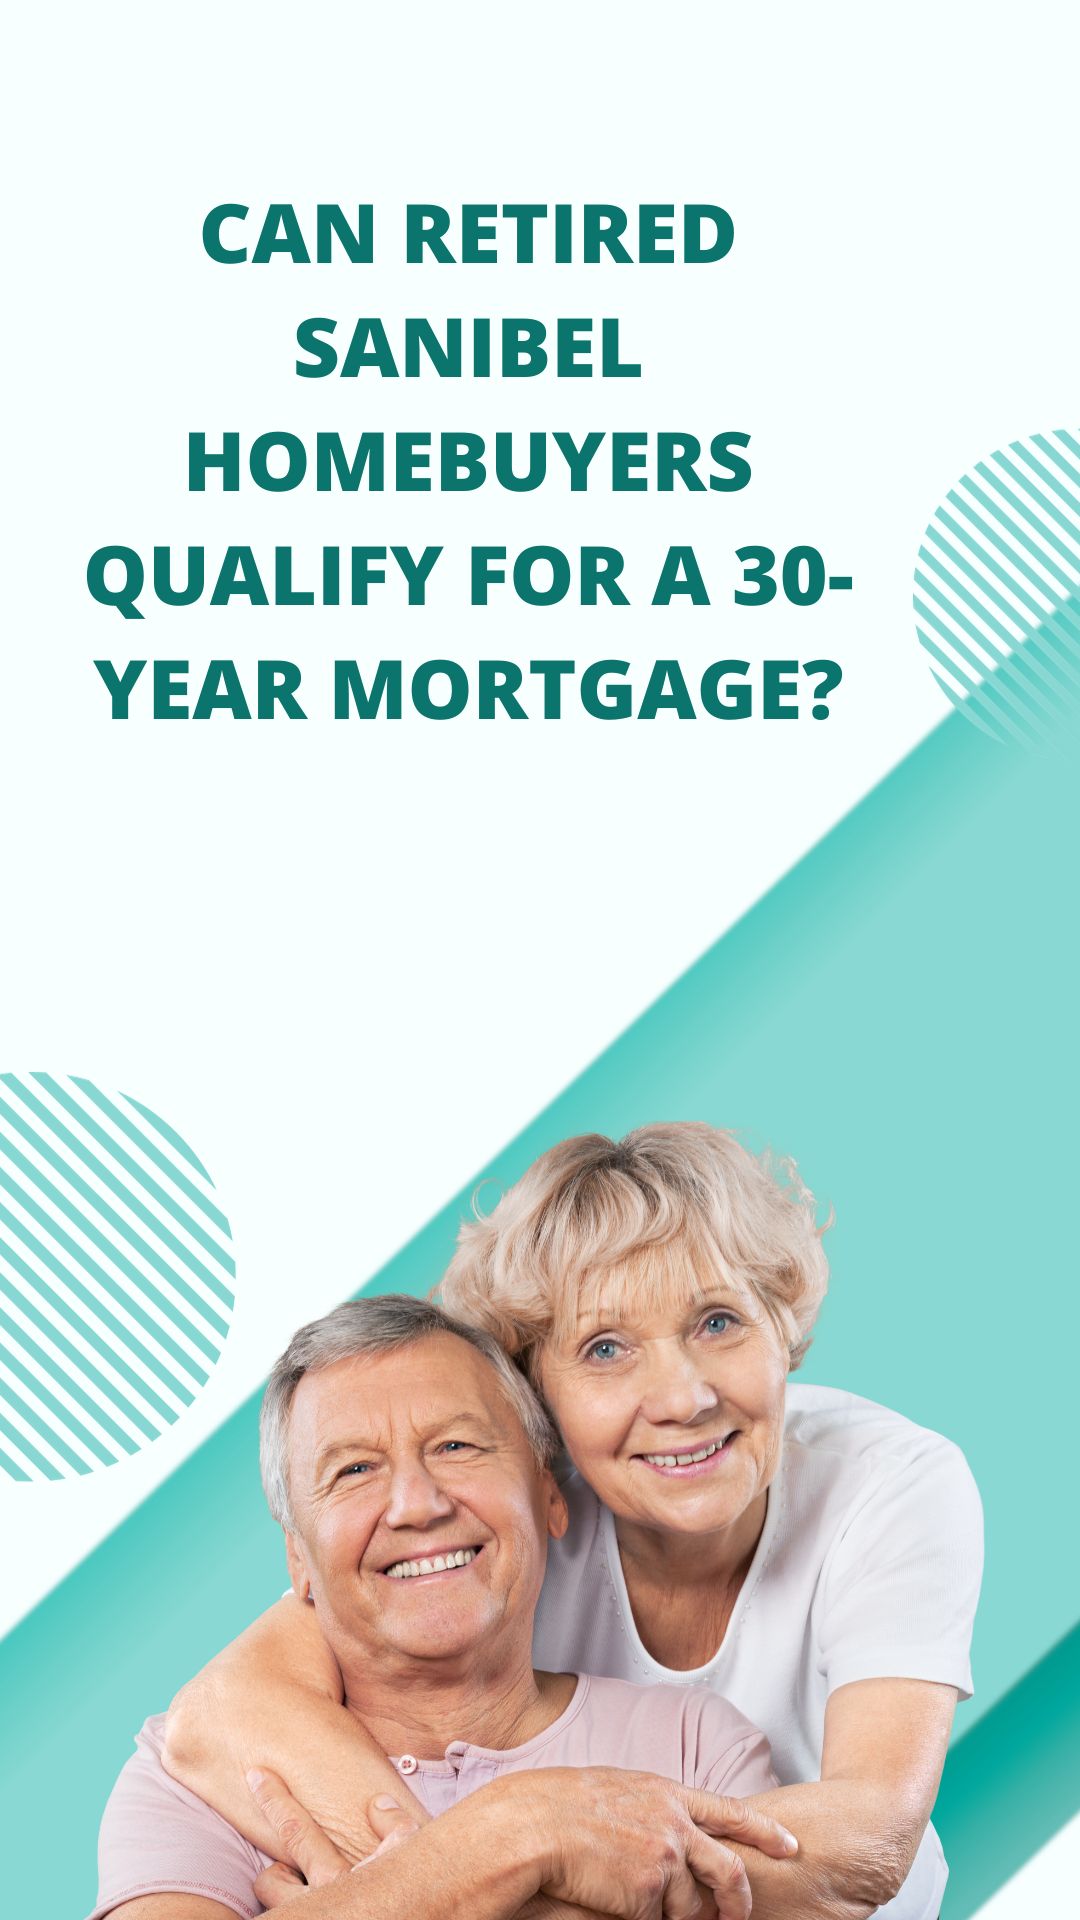 Can Retired Sanibel Homebuyers Qualify for a 30-Year Mortgage?